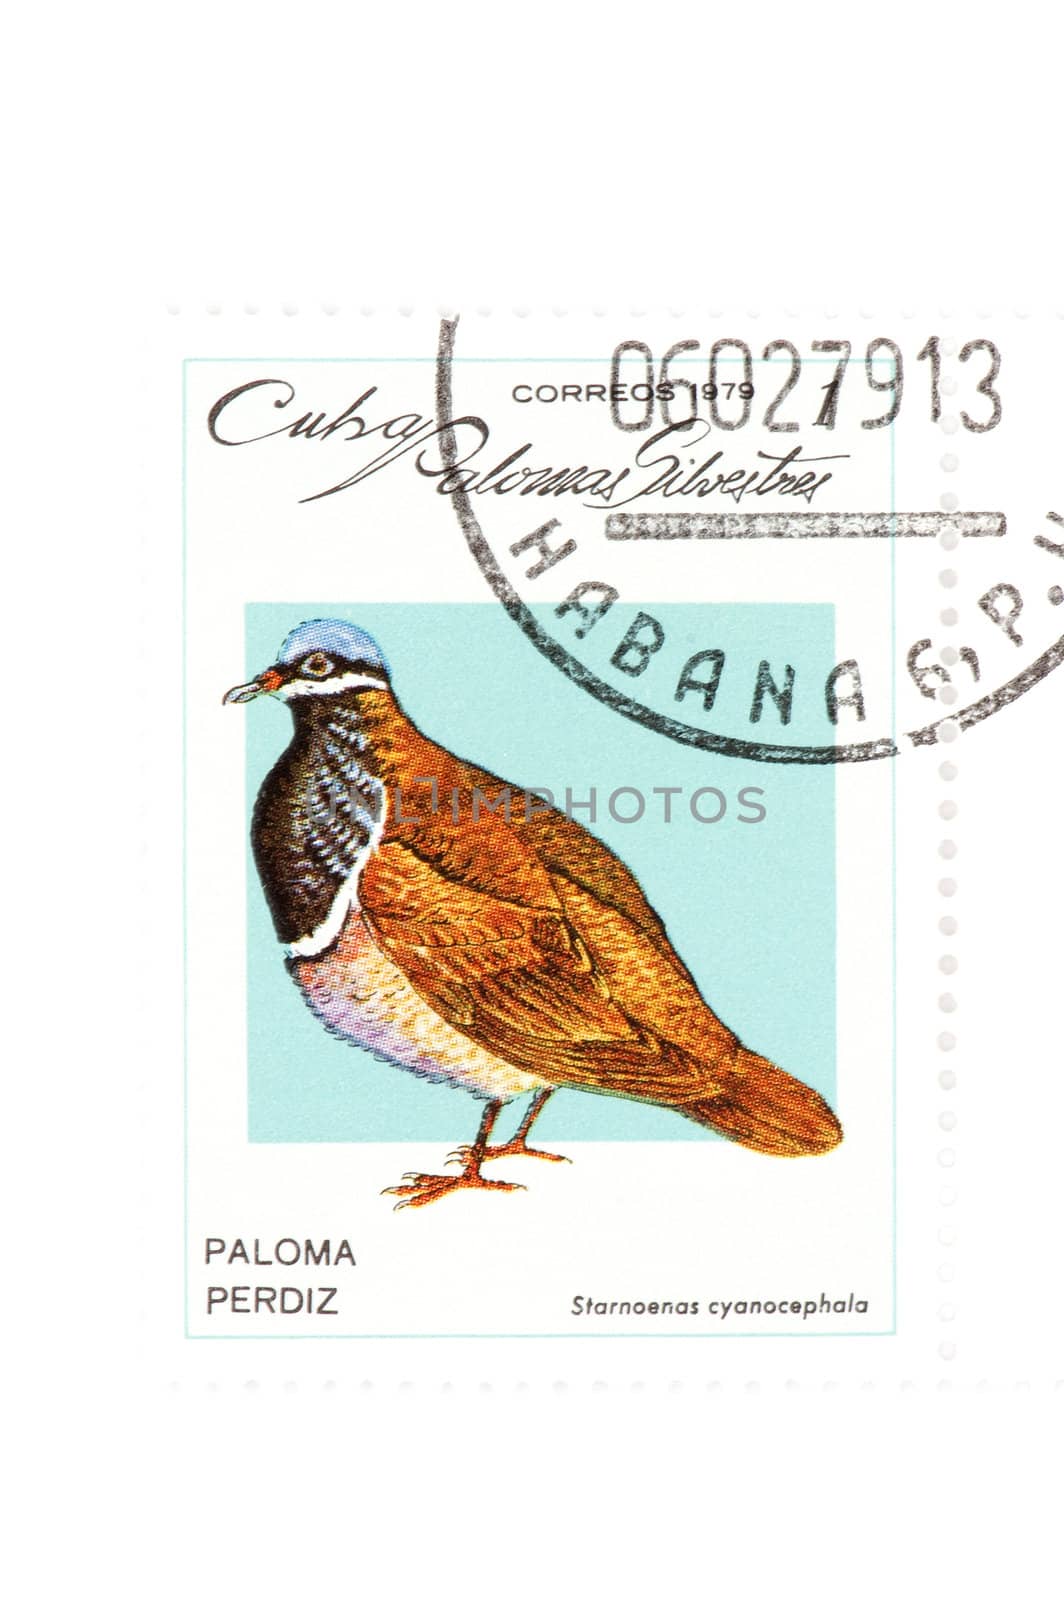 object on white - Cuban postage stamp